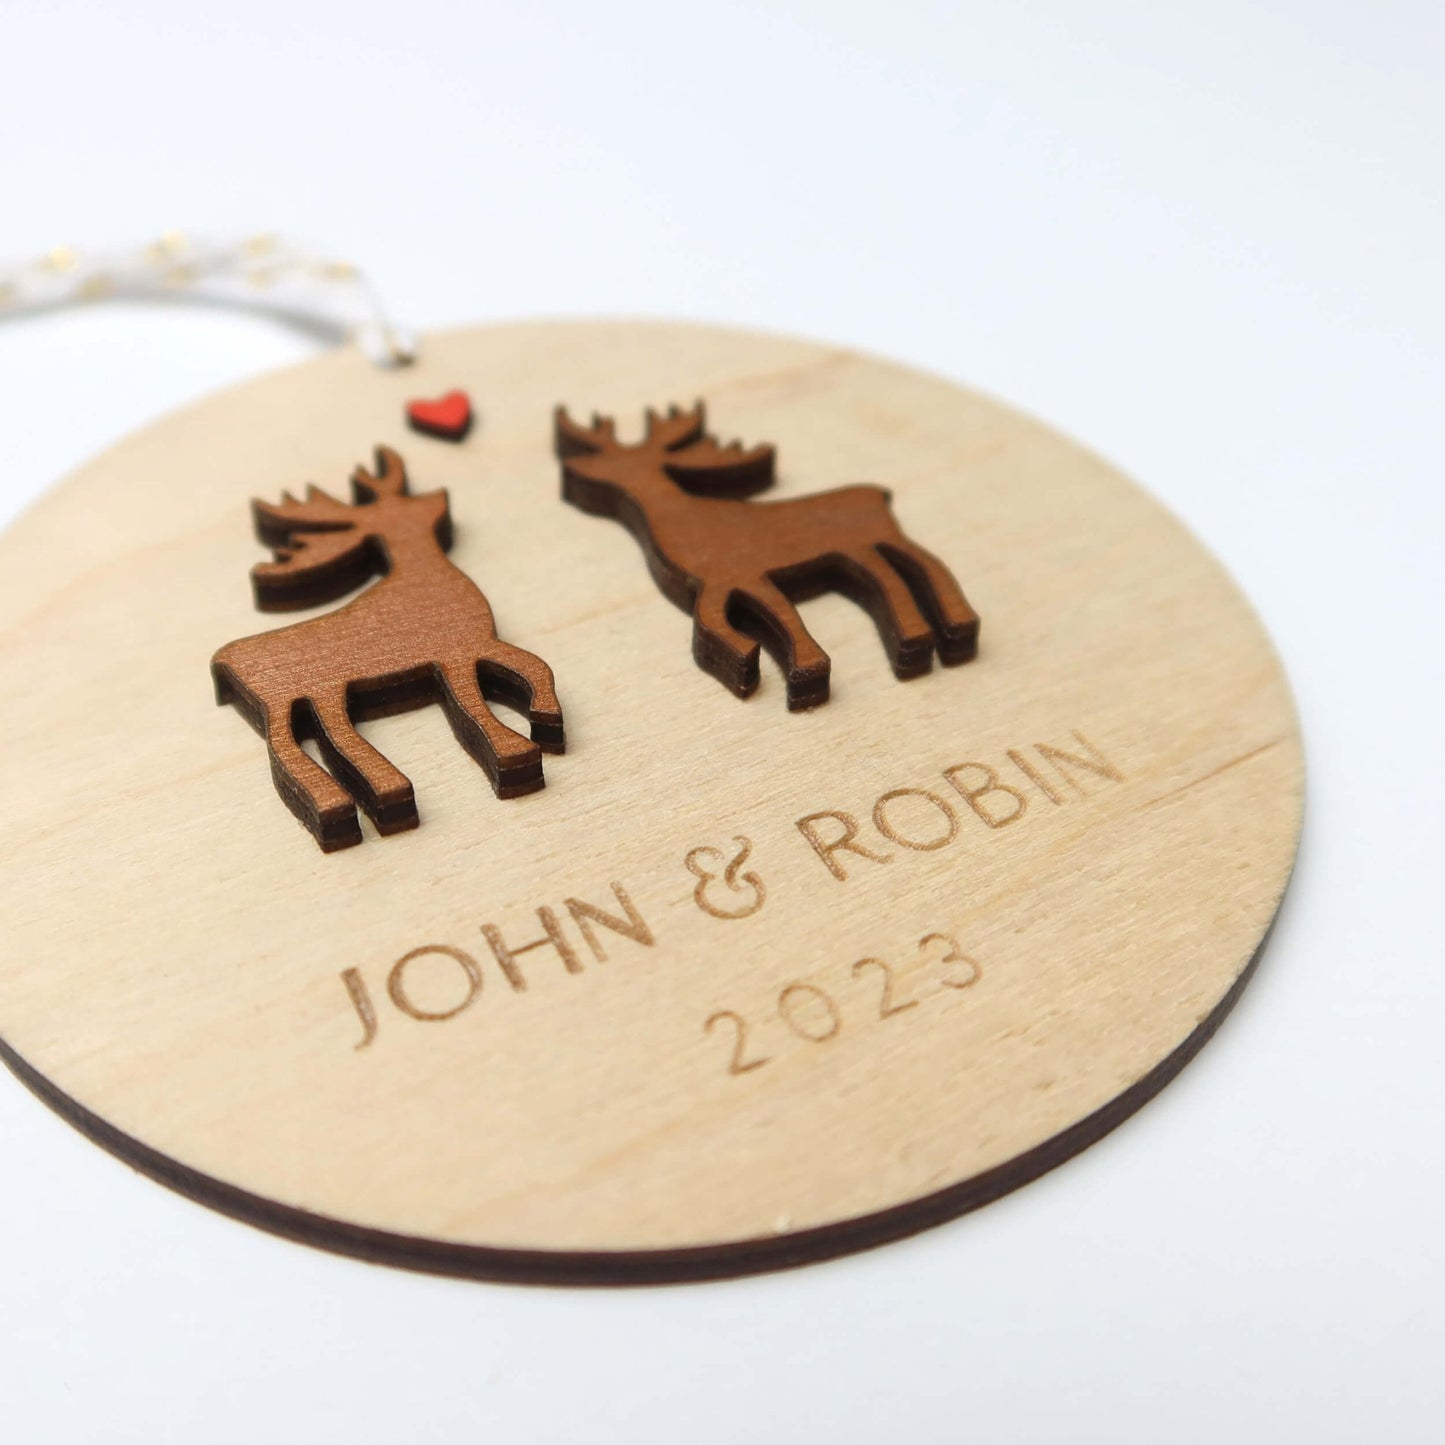 Reindeer Personalized Couple Christmas Ornament - Holiday Ornaments - Moon Rock Prints